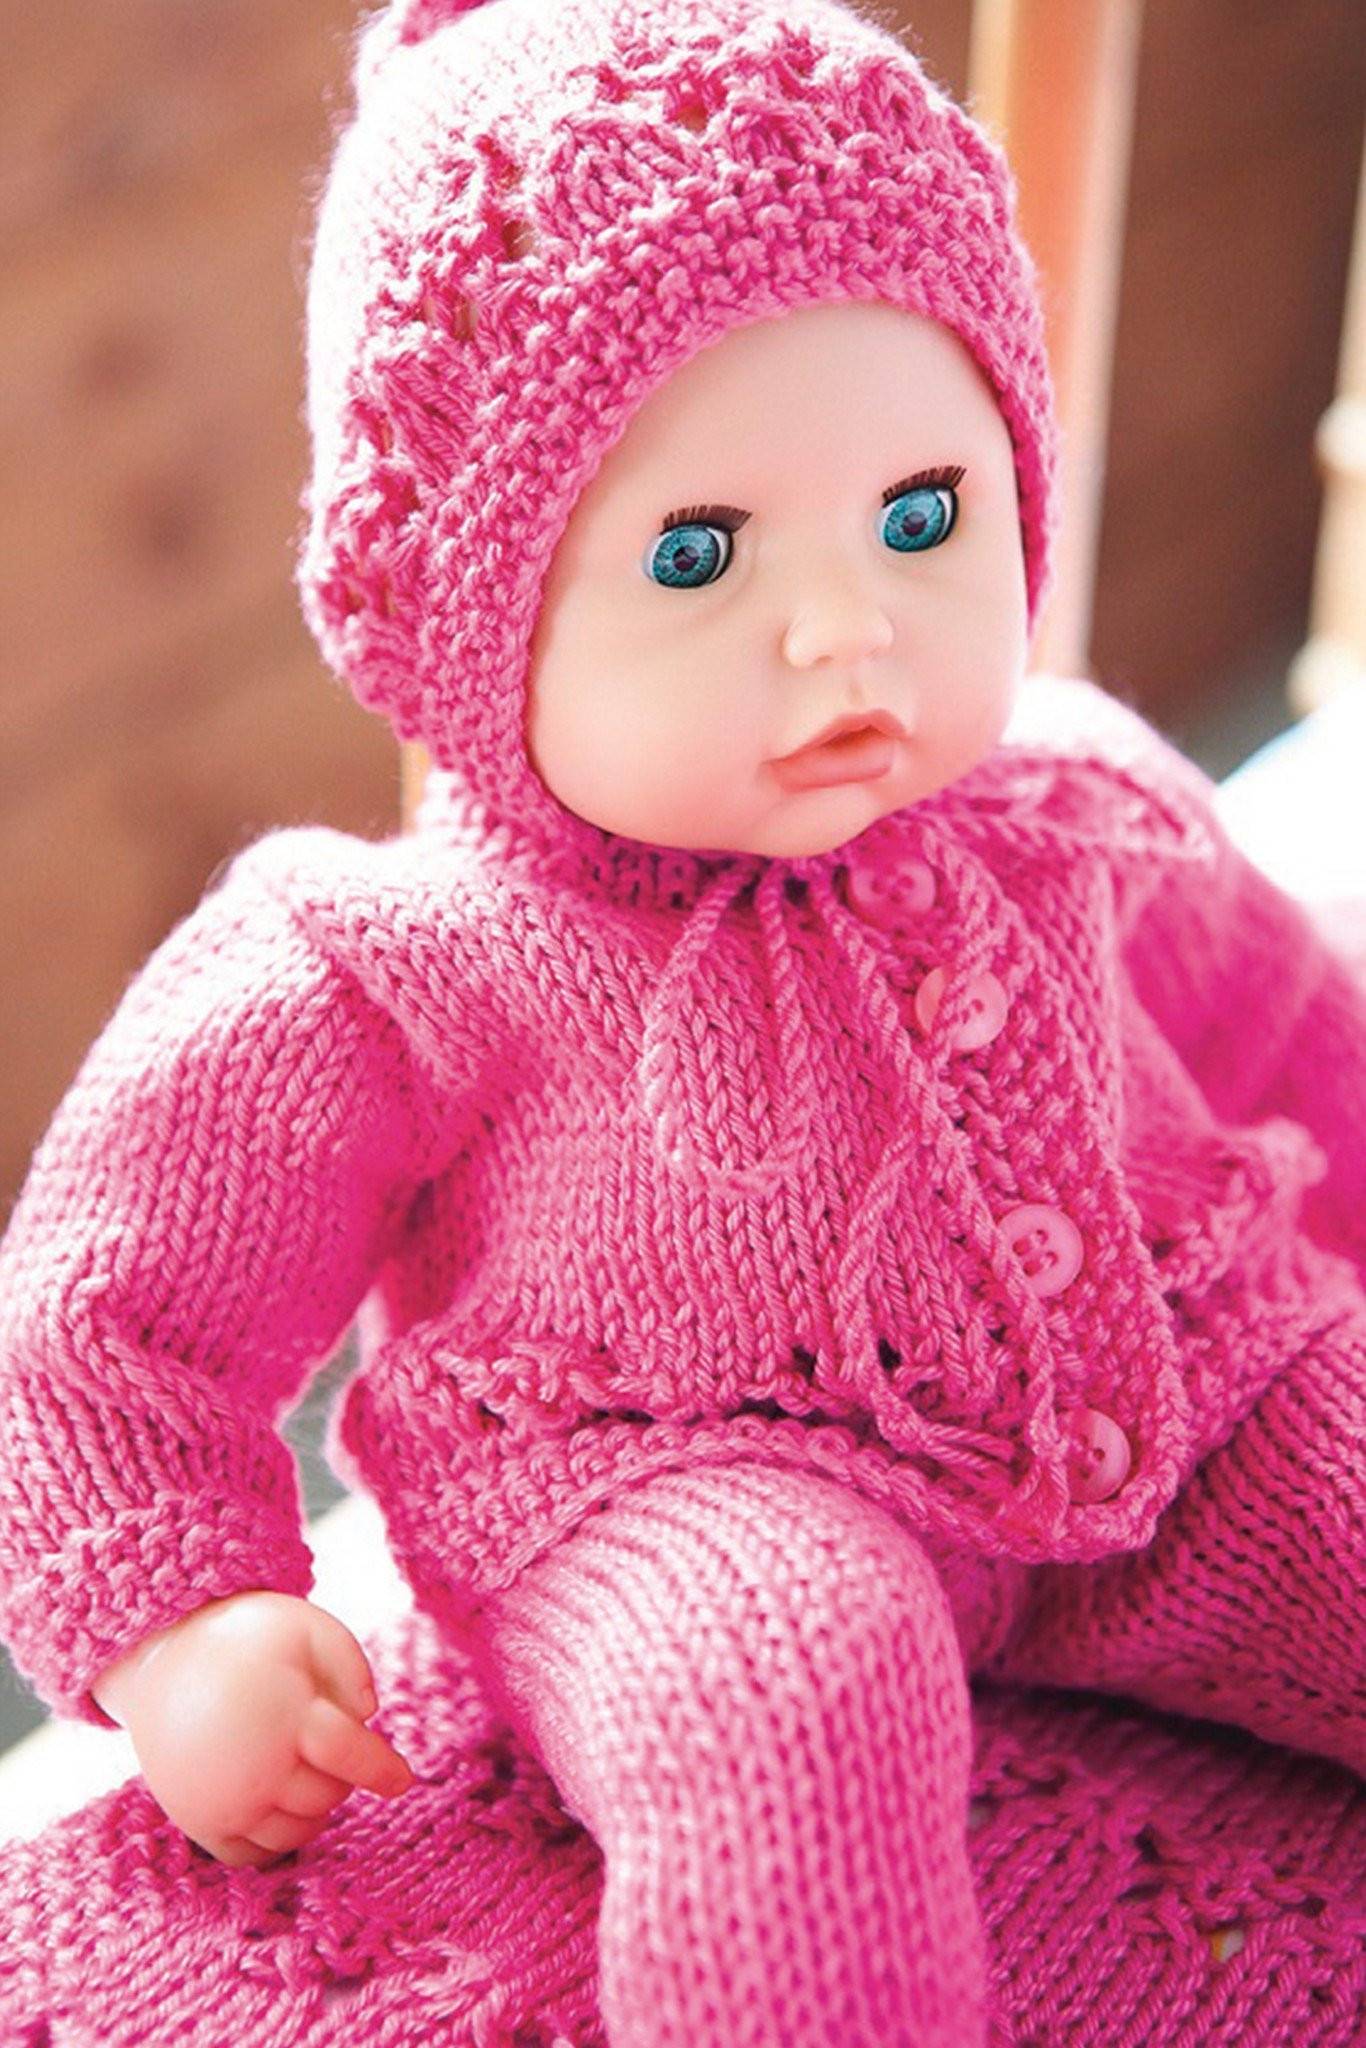 Doll Clothes Knitting Pattern The Knitting Network